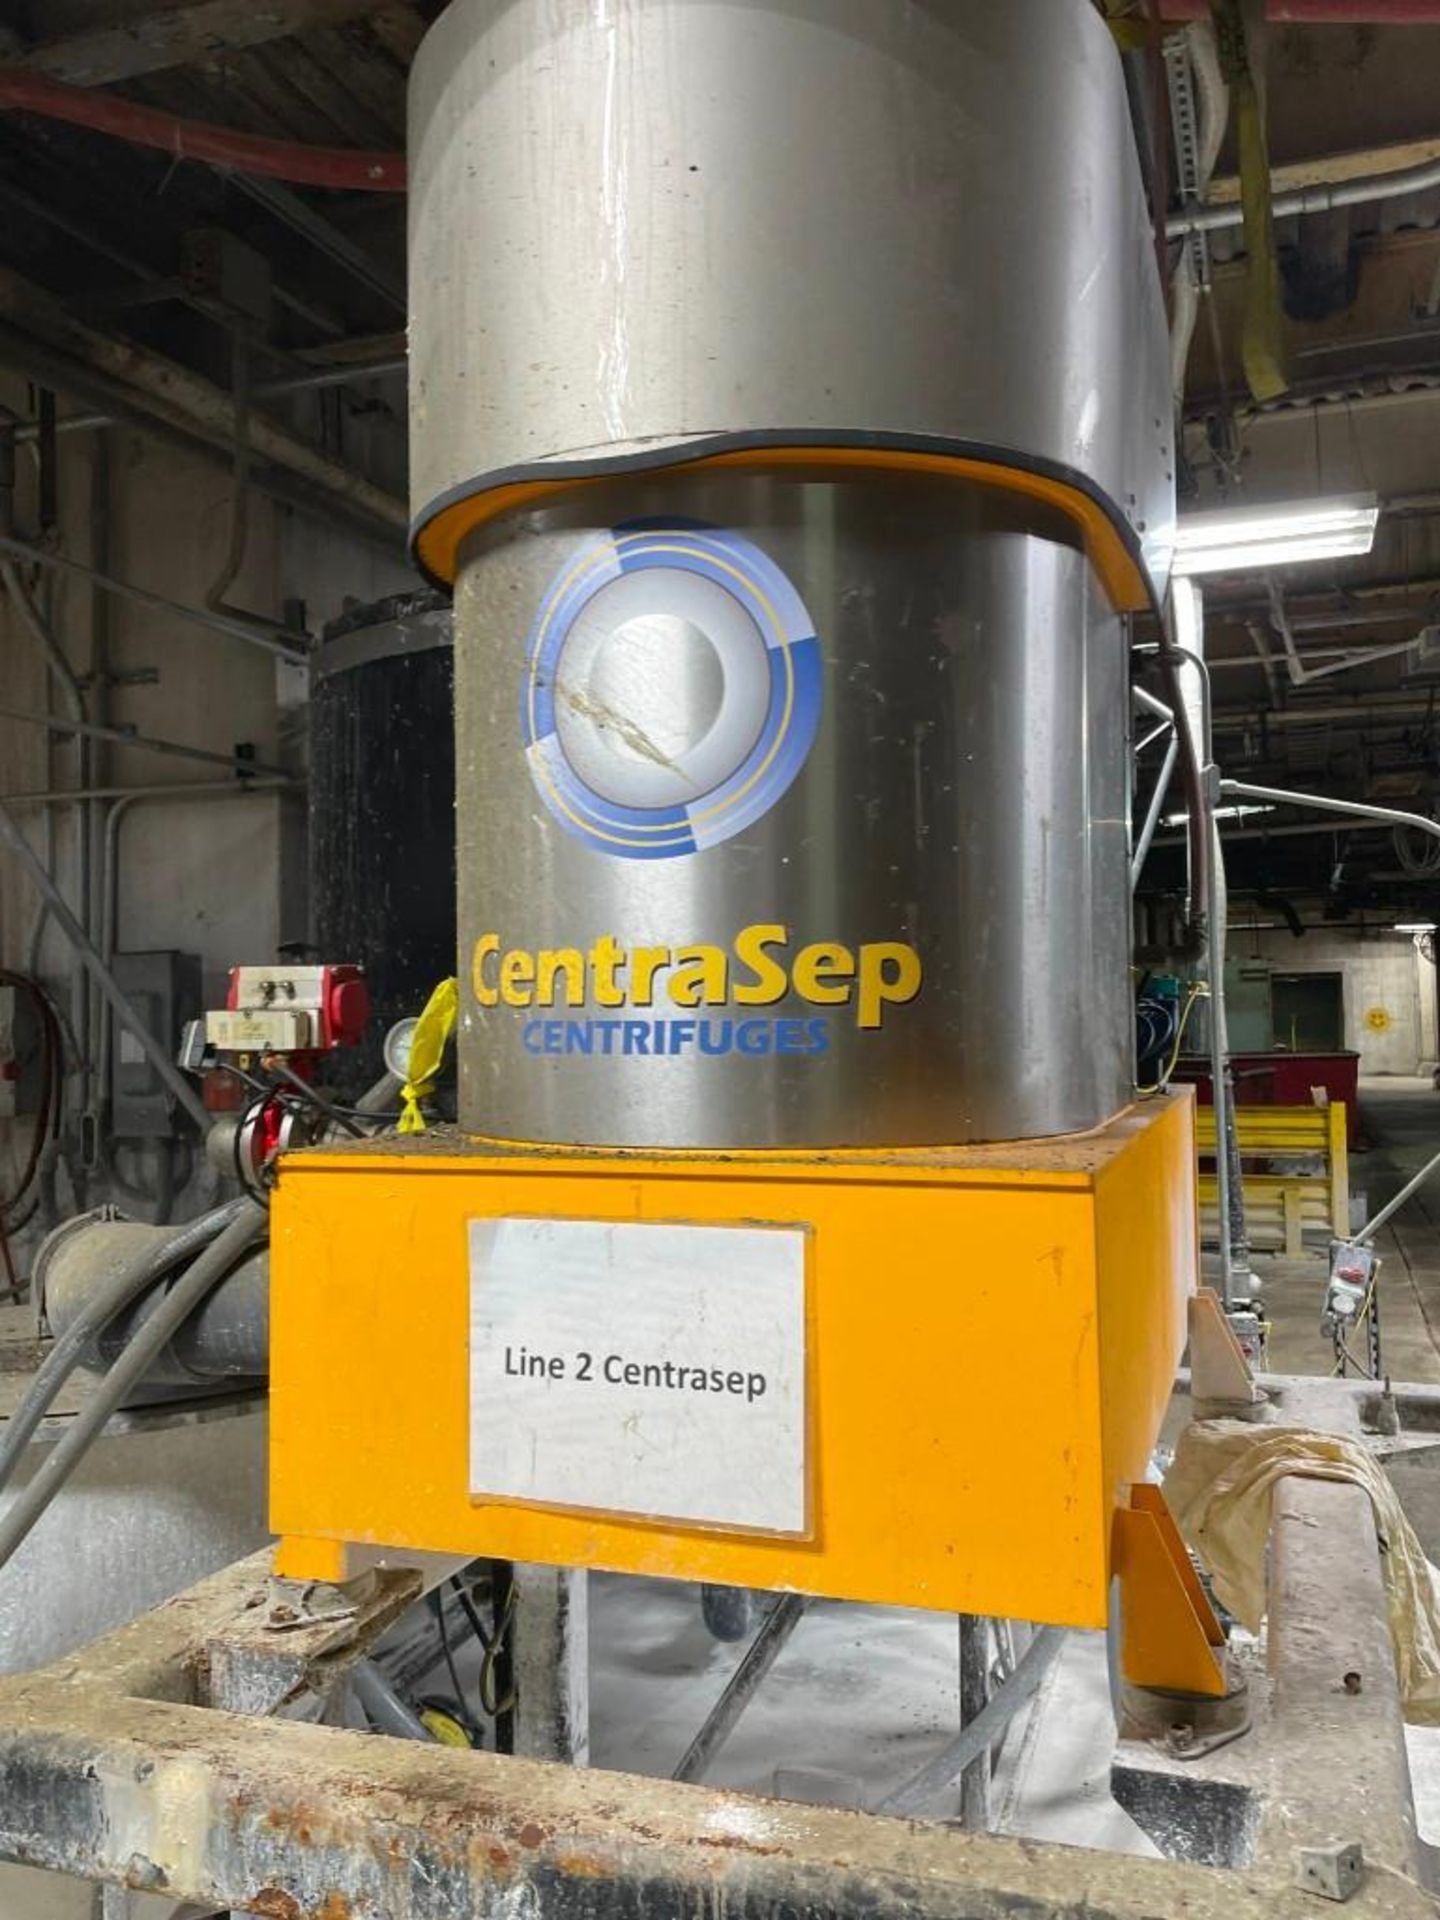 CentraSep Centrifugal Separation 3 Tank Filtration System - Image 6 of 9